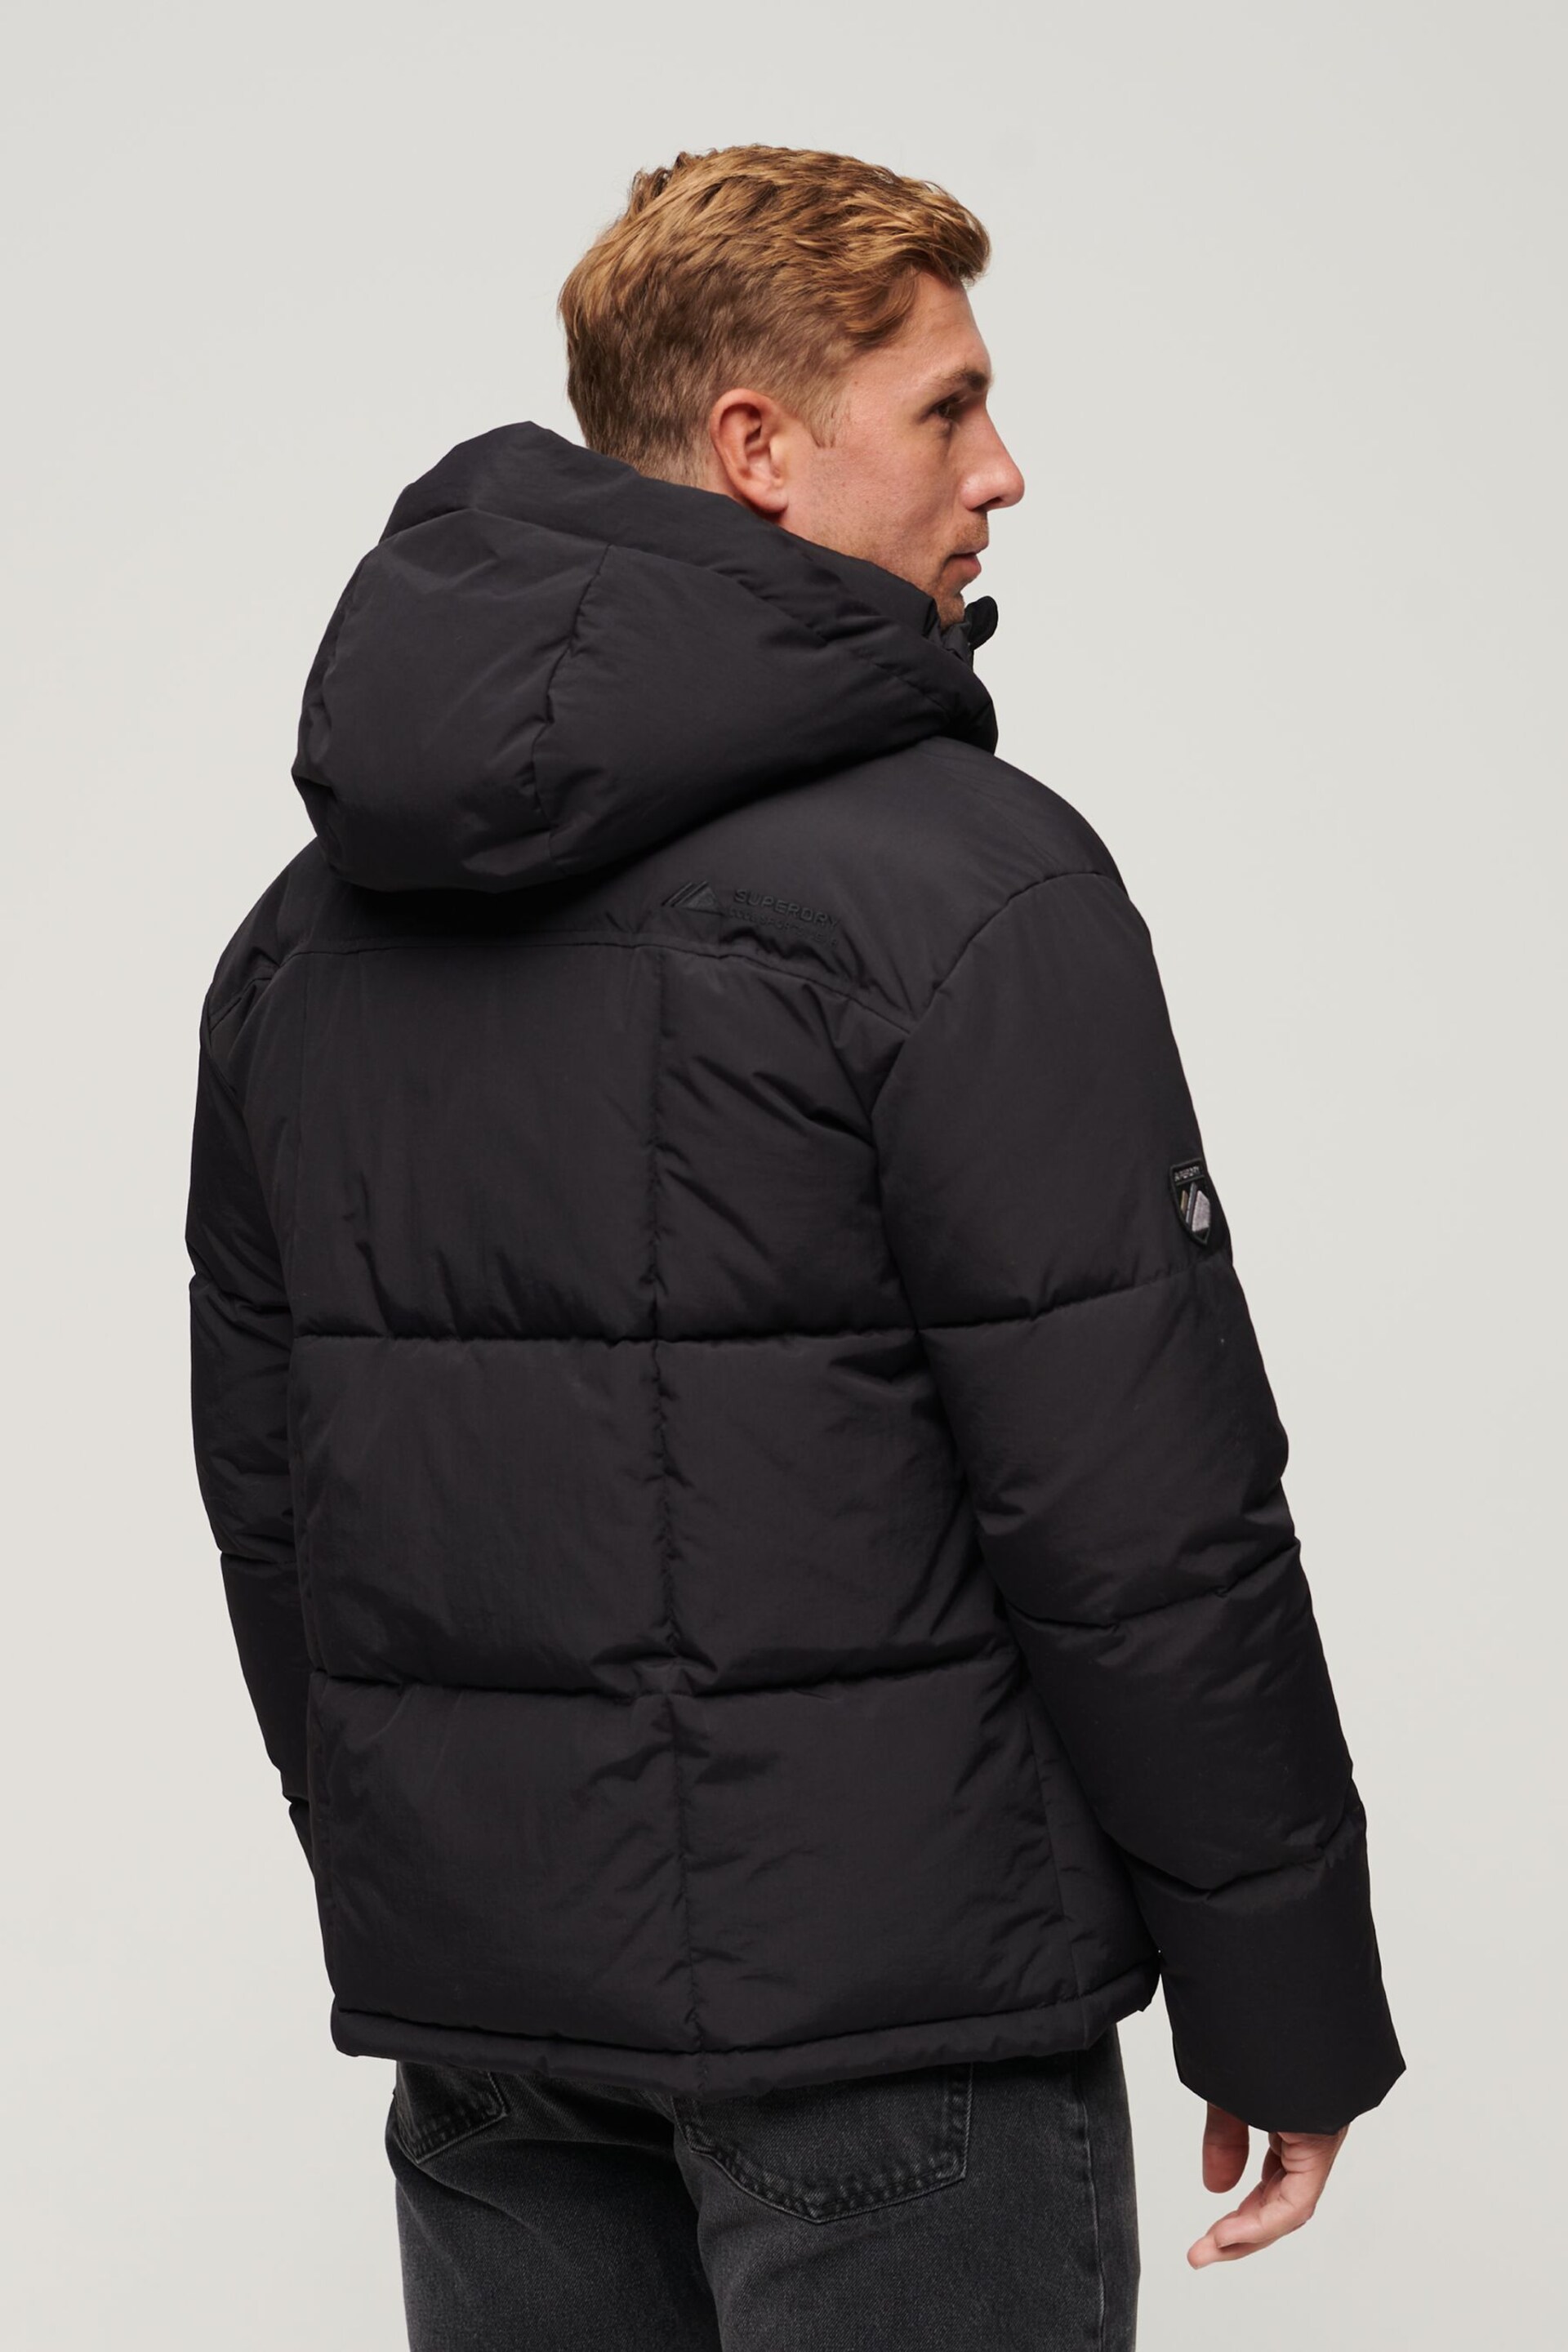 Superdry Black Hooded Box Quilt Puffer Jacket - Image 2 of 3